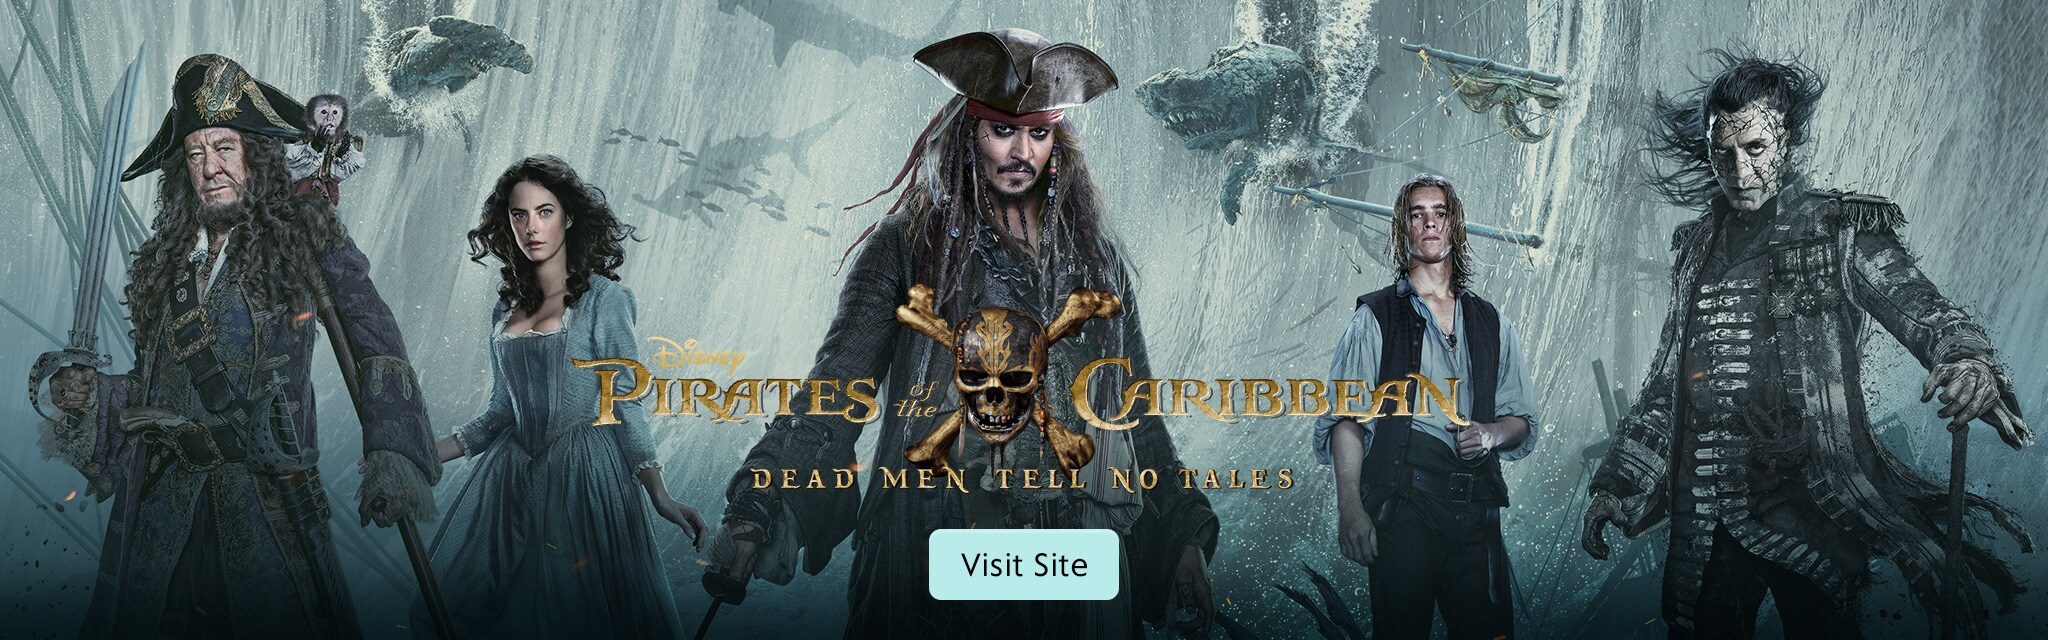 pirates of the caribbean 1 full movie watch online free